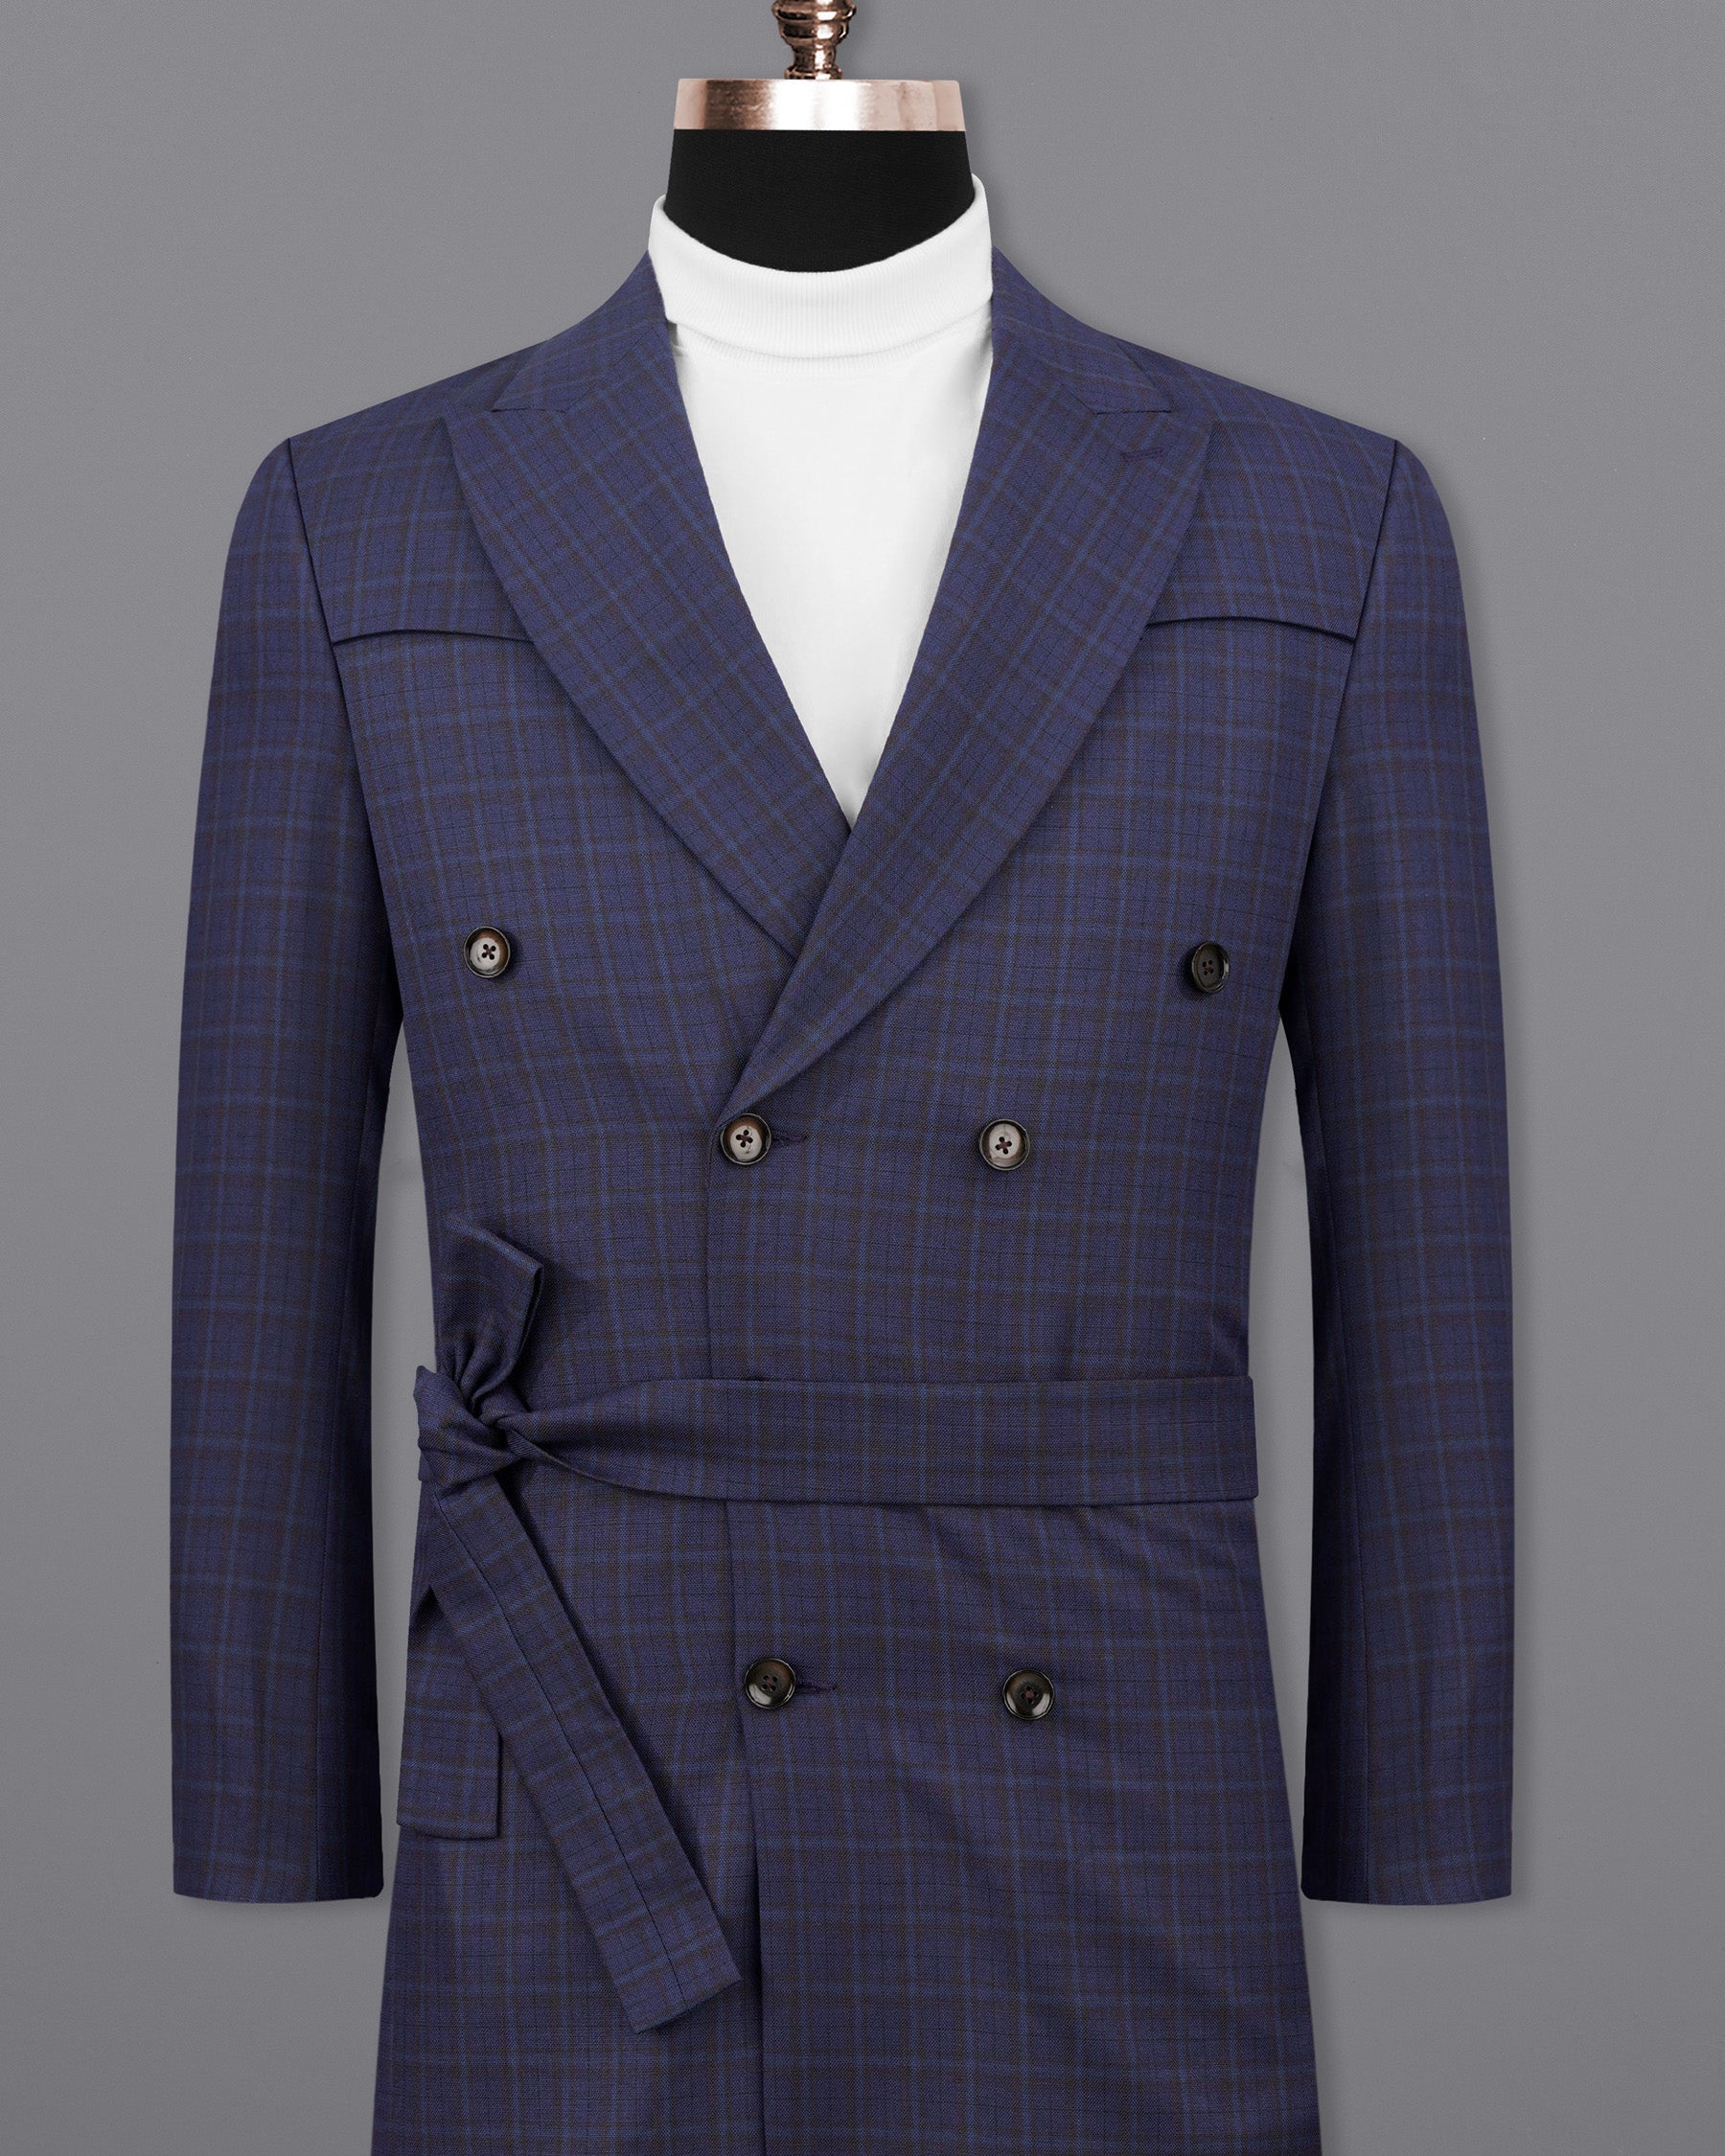 Martinique blue Subtle Checkered Double Breasted with Belt Closure Designer Trench Coat TCB2112-DB-D35-36, TCB2112-DB-D35-38, TCB2112-DB-D35-40, TCB2112-DB-D35-42, TCB2112-DB-D35-44, TCB2112-DB-D35-46, TCB2112-DB-D35-48, TCB2112-DB-D35-50, TCB2112-DB-D35-52, TCB2112-DB-D35-54, TCB2112-DB-D35-56, TCB2112-DB-D35-58, TCB2112-DB-D35-60